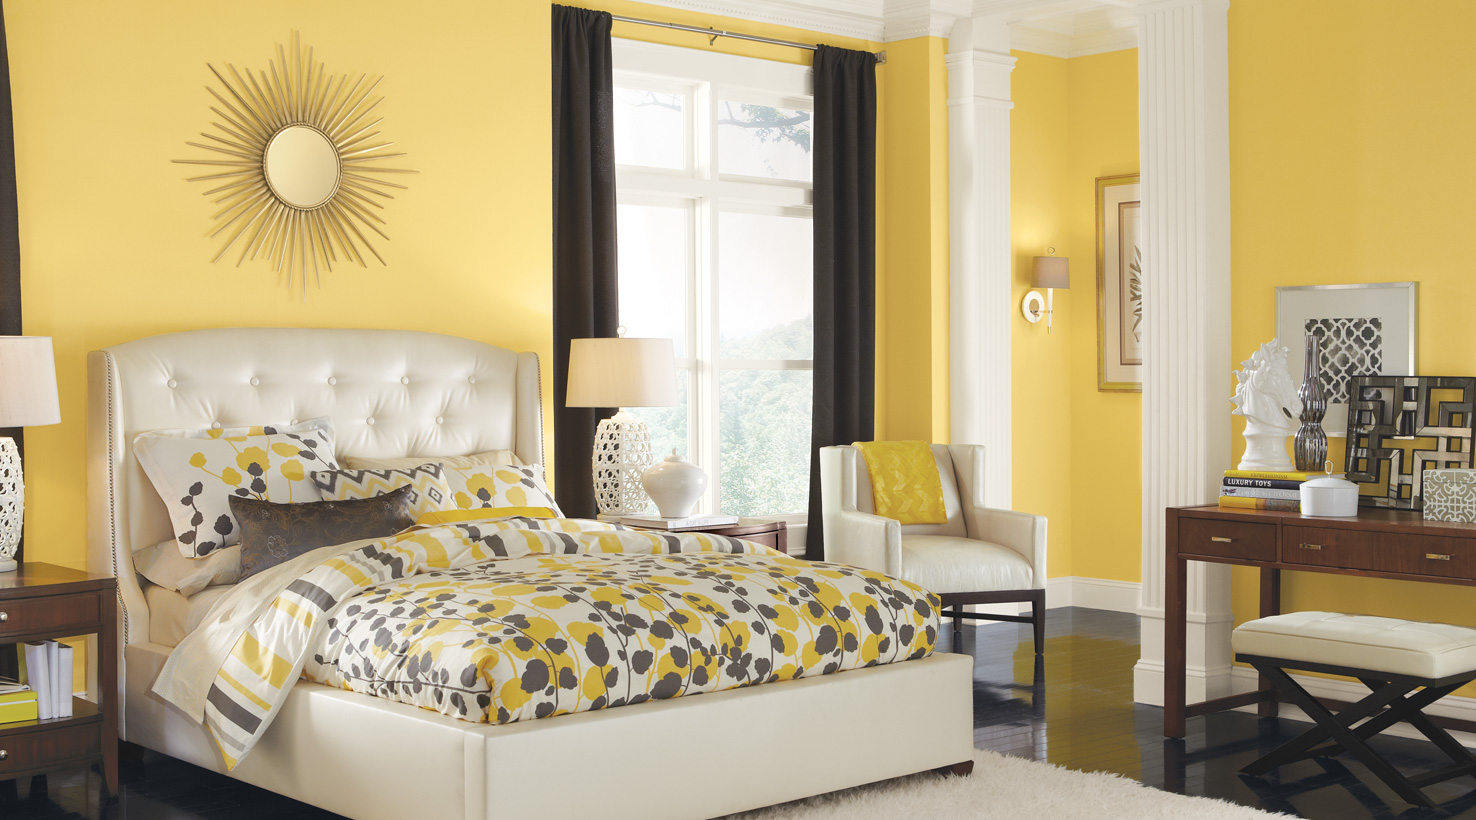 Bedroom accent wall paint ideas, when it comes to decorating your bedroom, the accent wall can serve as a focal point, adding depth, interest,